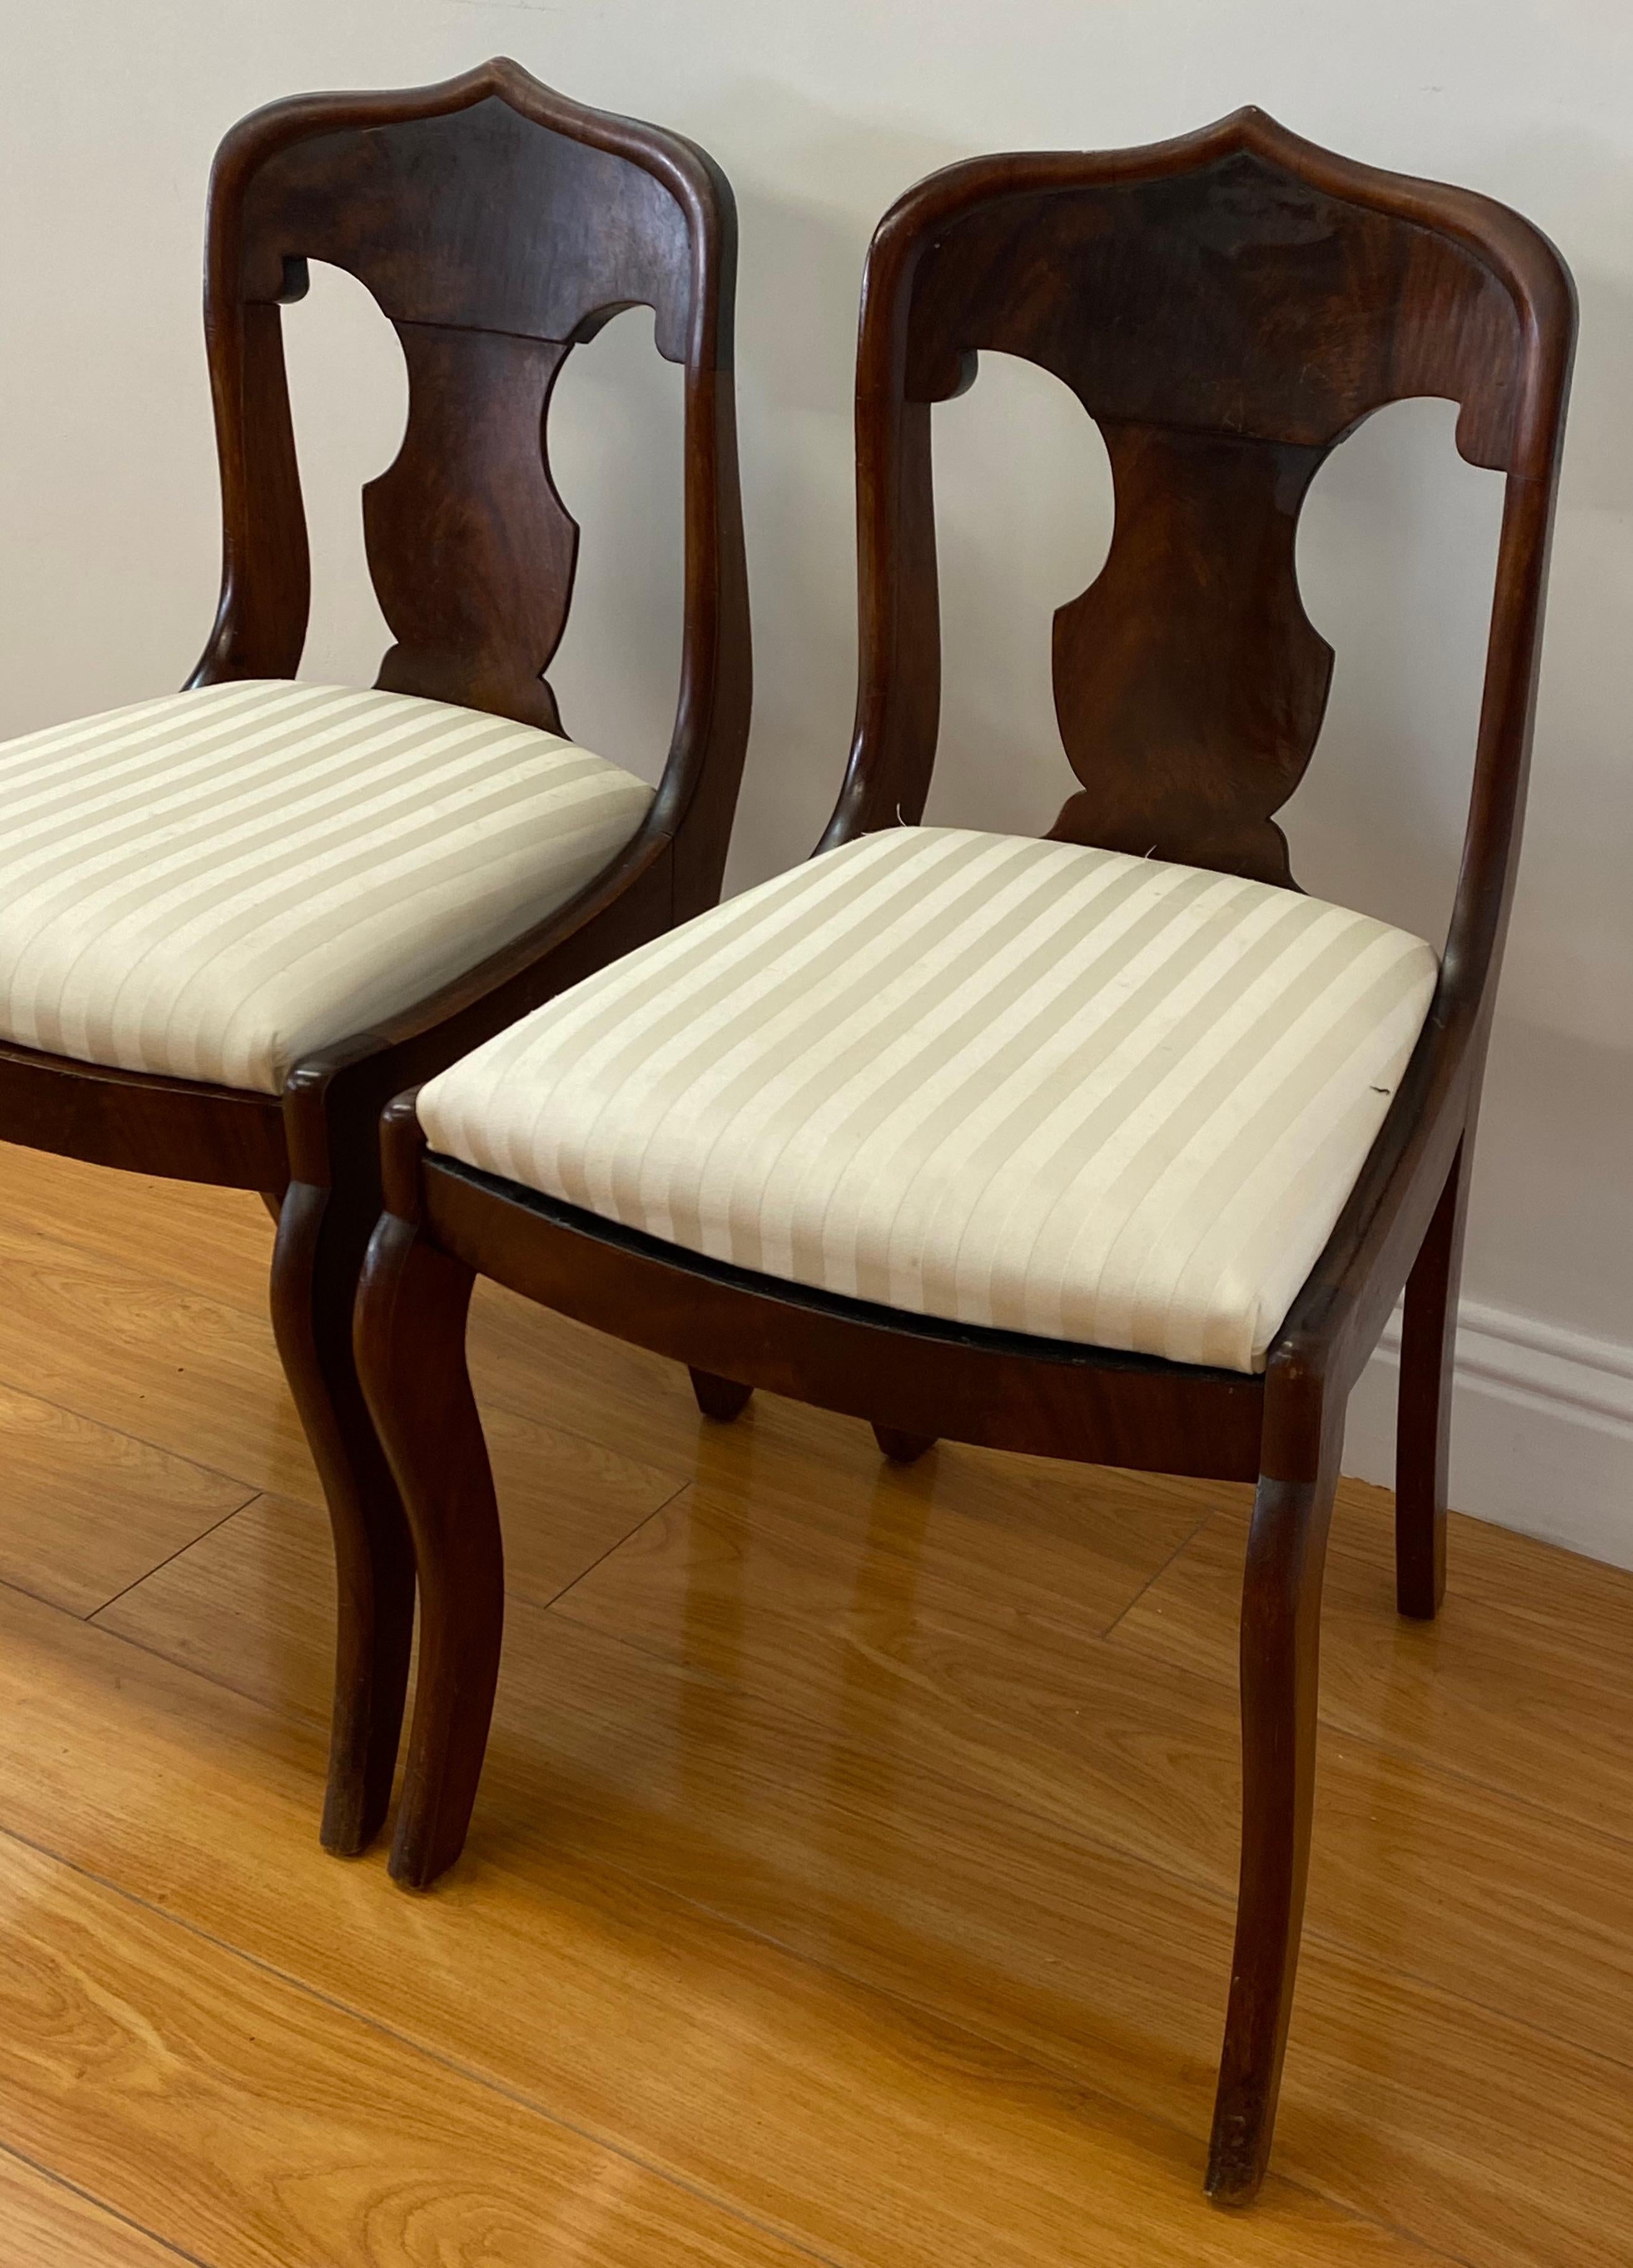 Pair of American flame mahogany empire style side chairs

The seats unscrew / Easily change fabric

The current fabric shows minor wear

Measures: 18